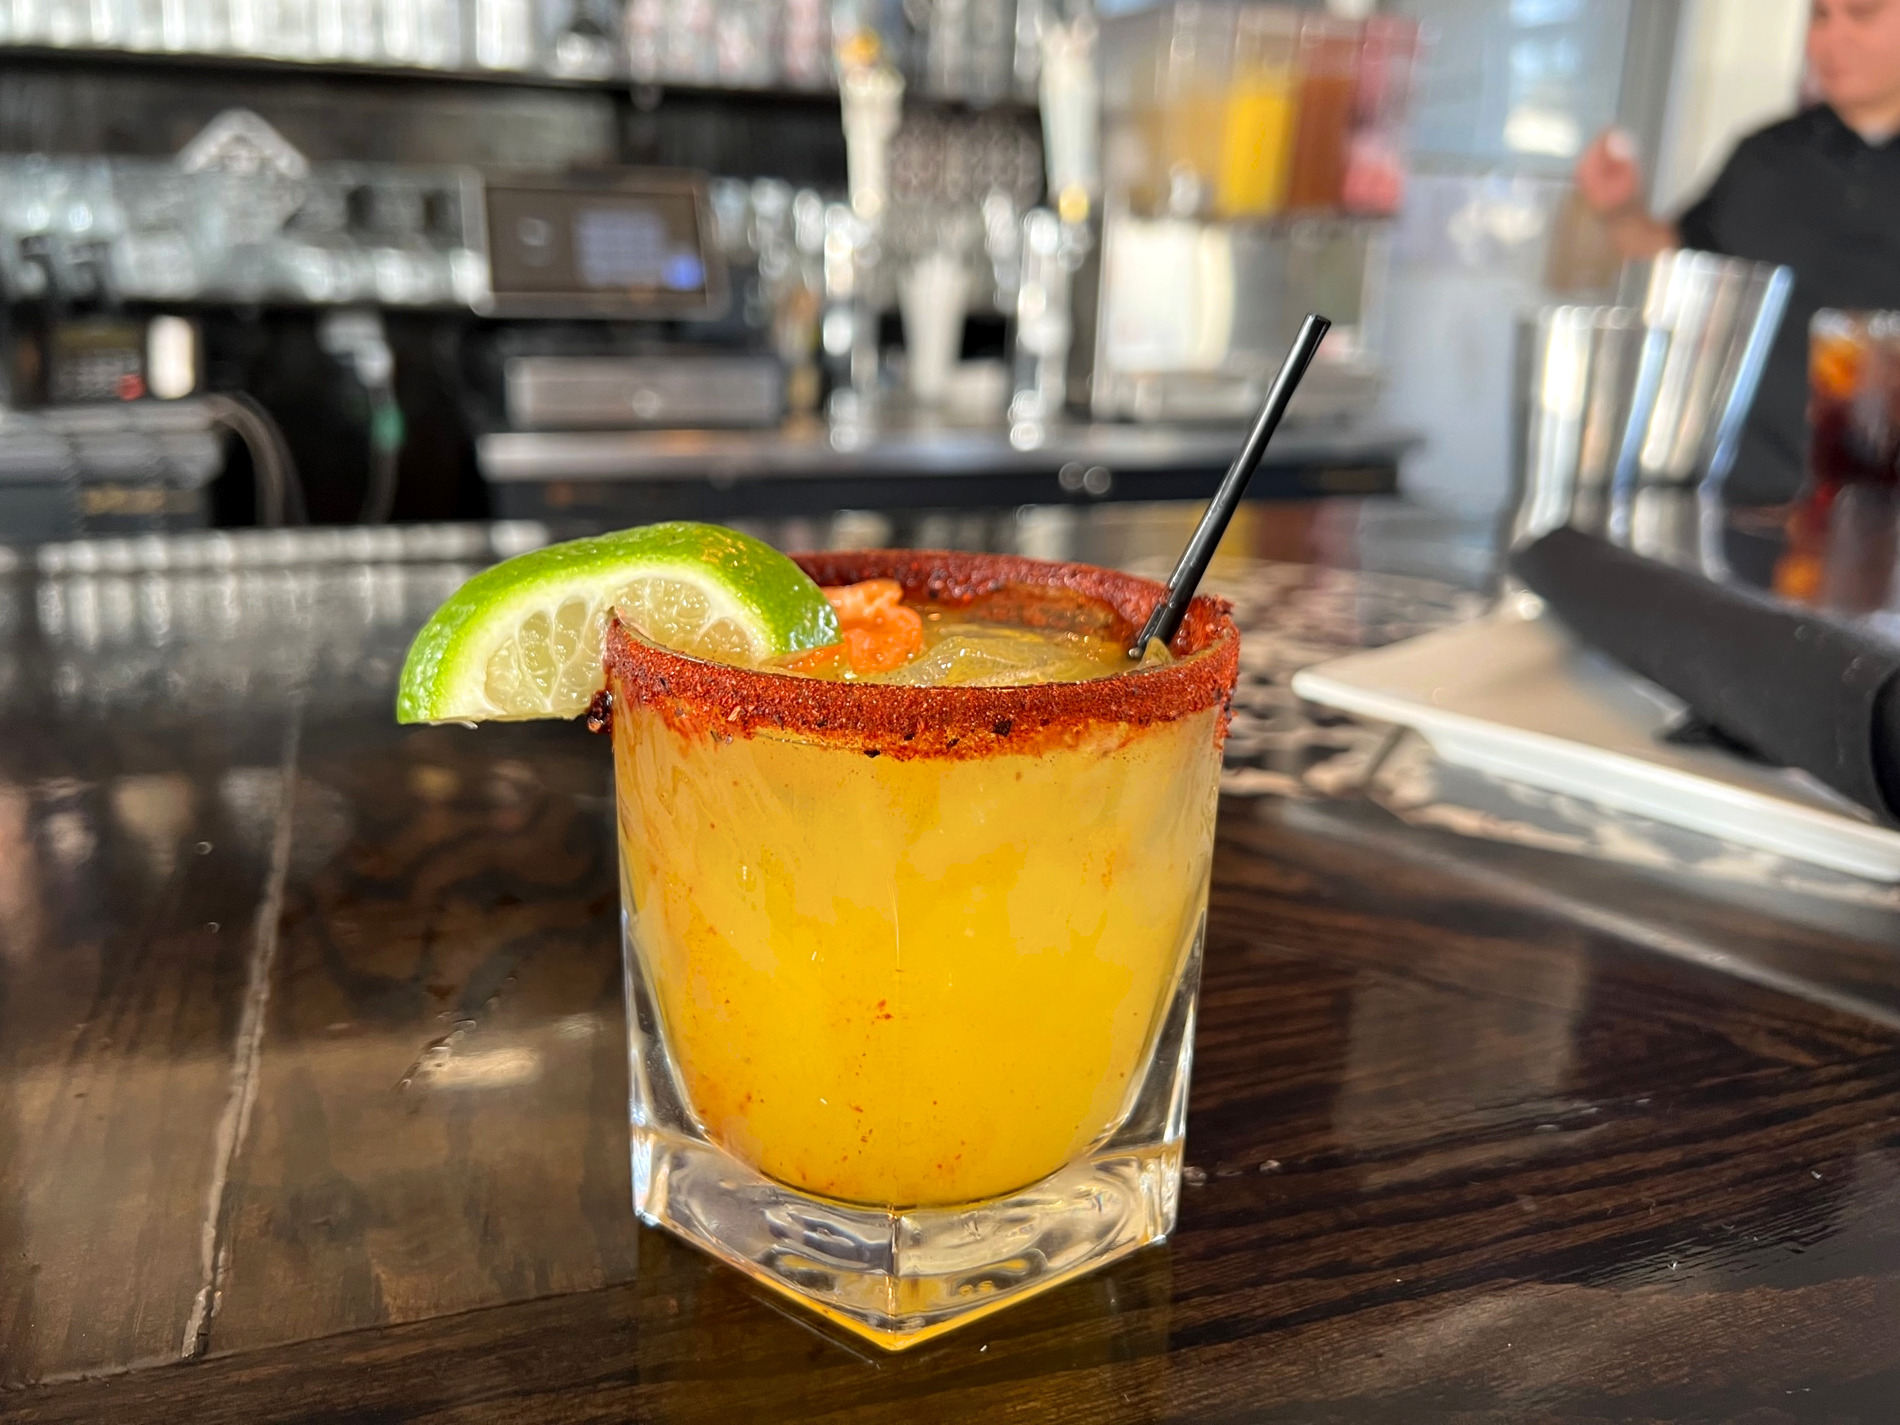 A mango habanero margarita from the restaurant Maize at The Station in Champaign, Illinois. Photo by Alyssa Buckley.